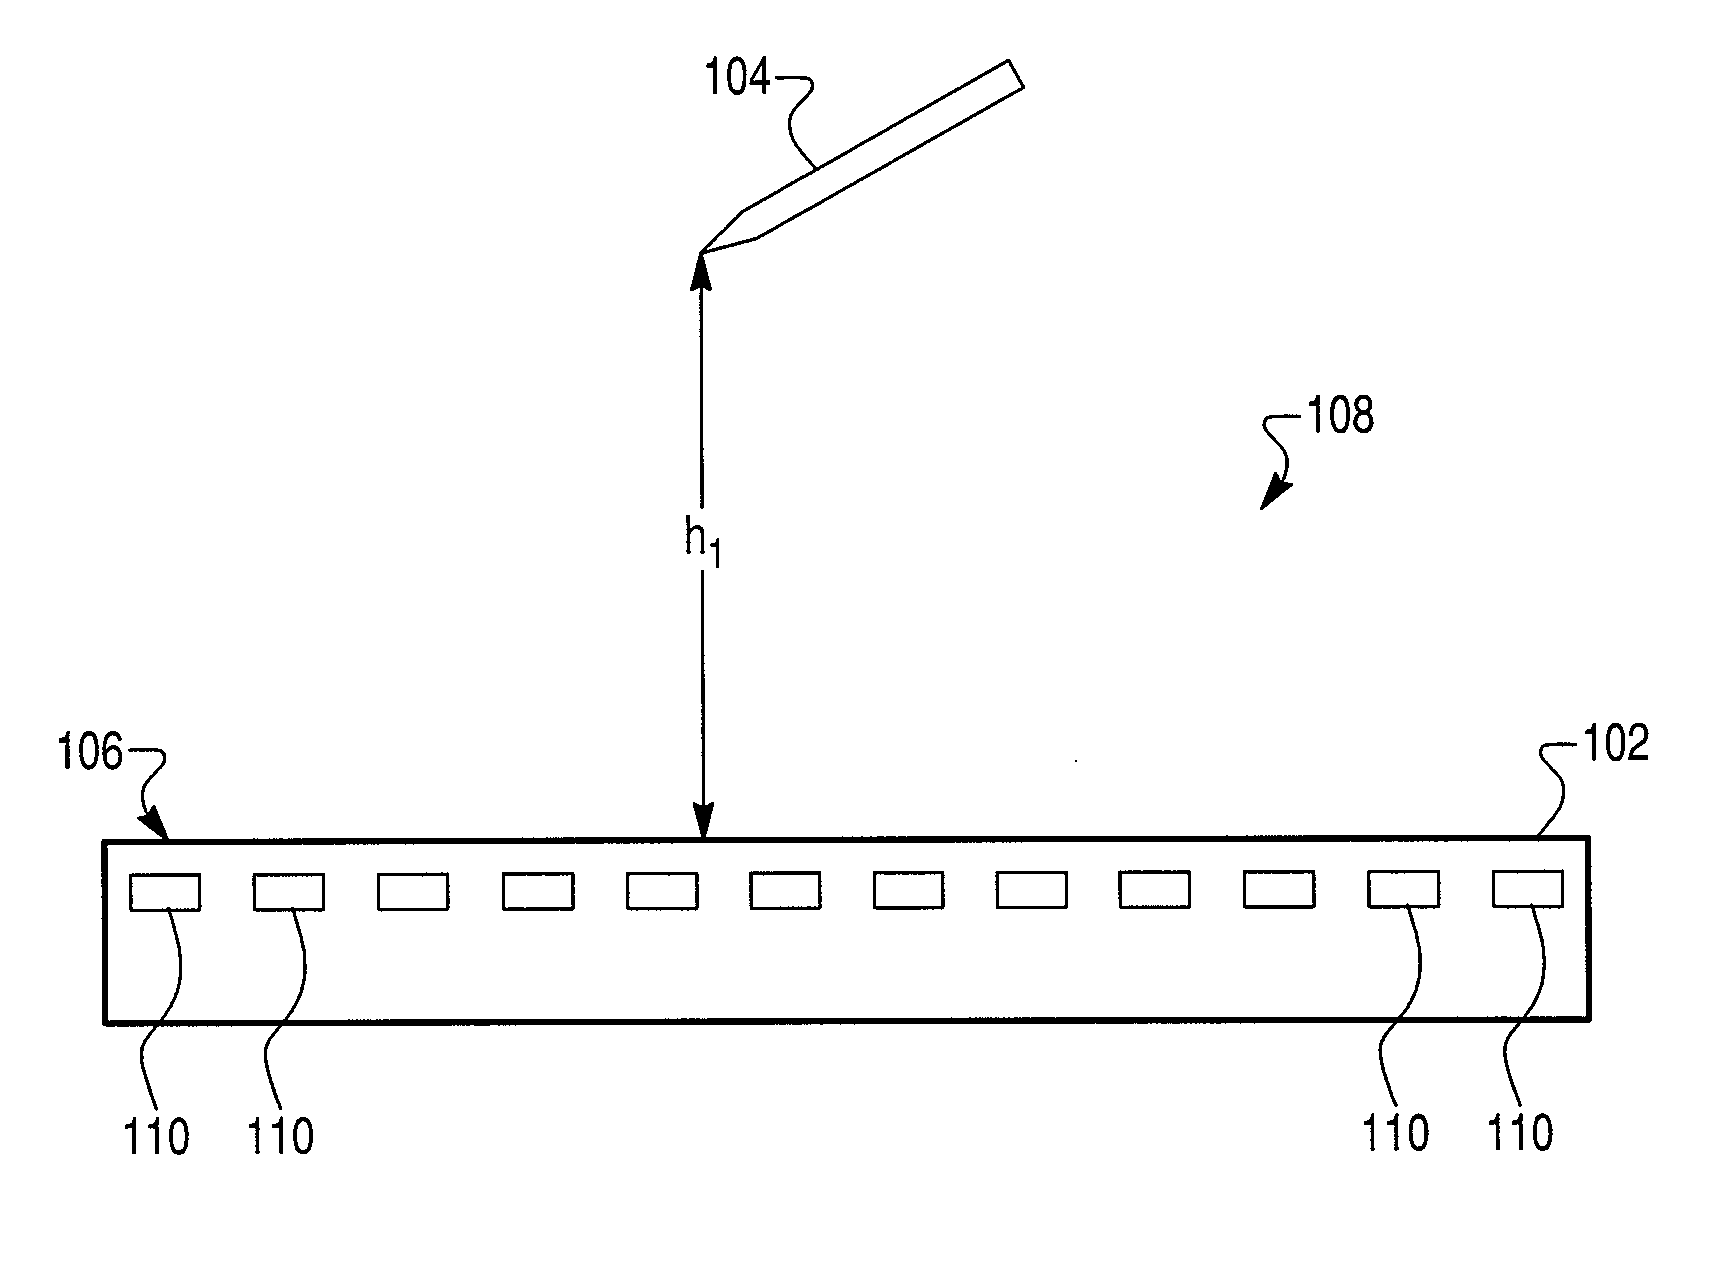 Height dependent filter for a pointing device or a digitizer tablet, a method of reducing jitter in position data of a pointing device or a digitizer tablet, a computer readable medium and driver for performing the method